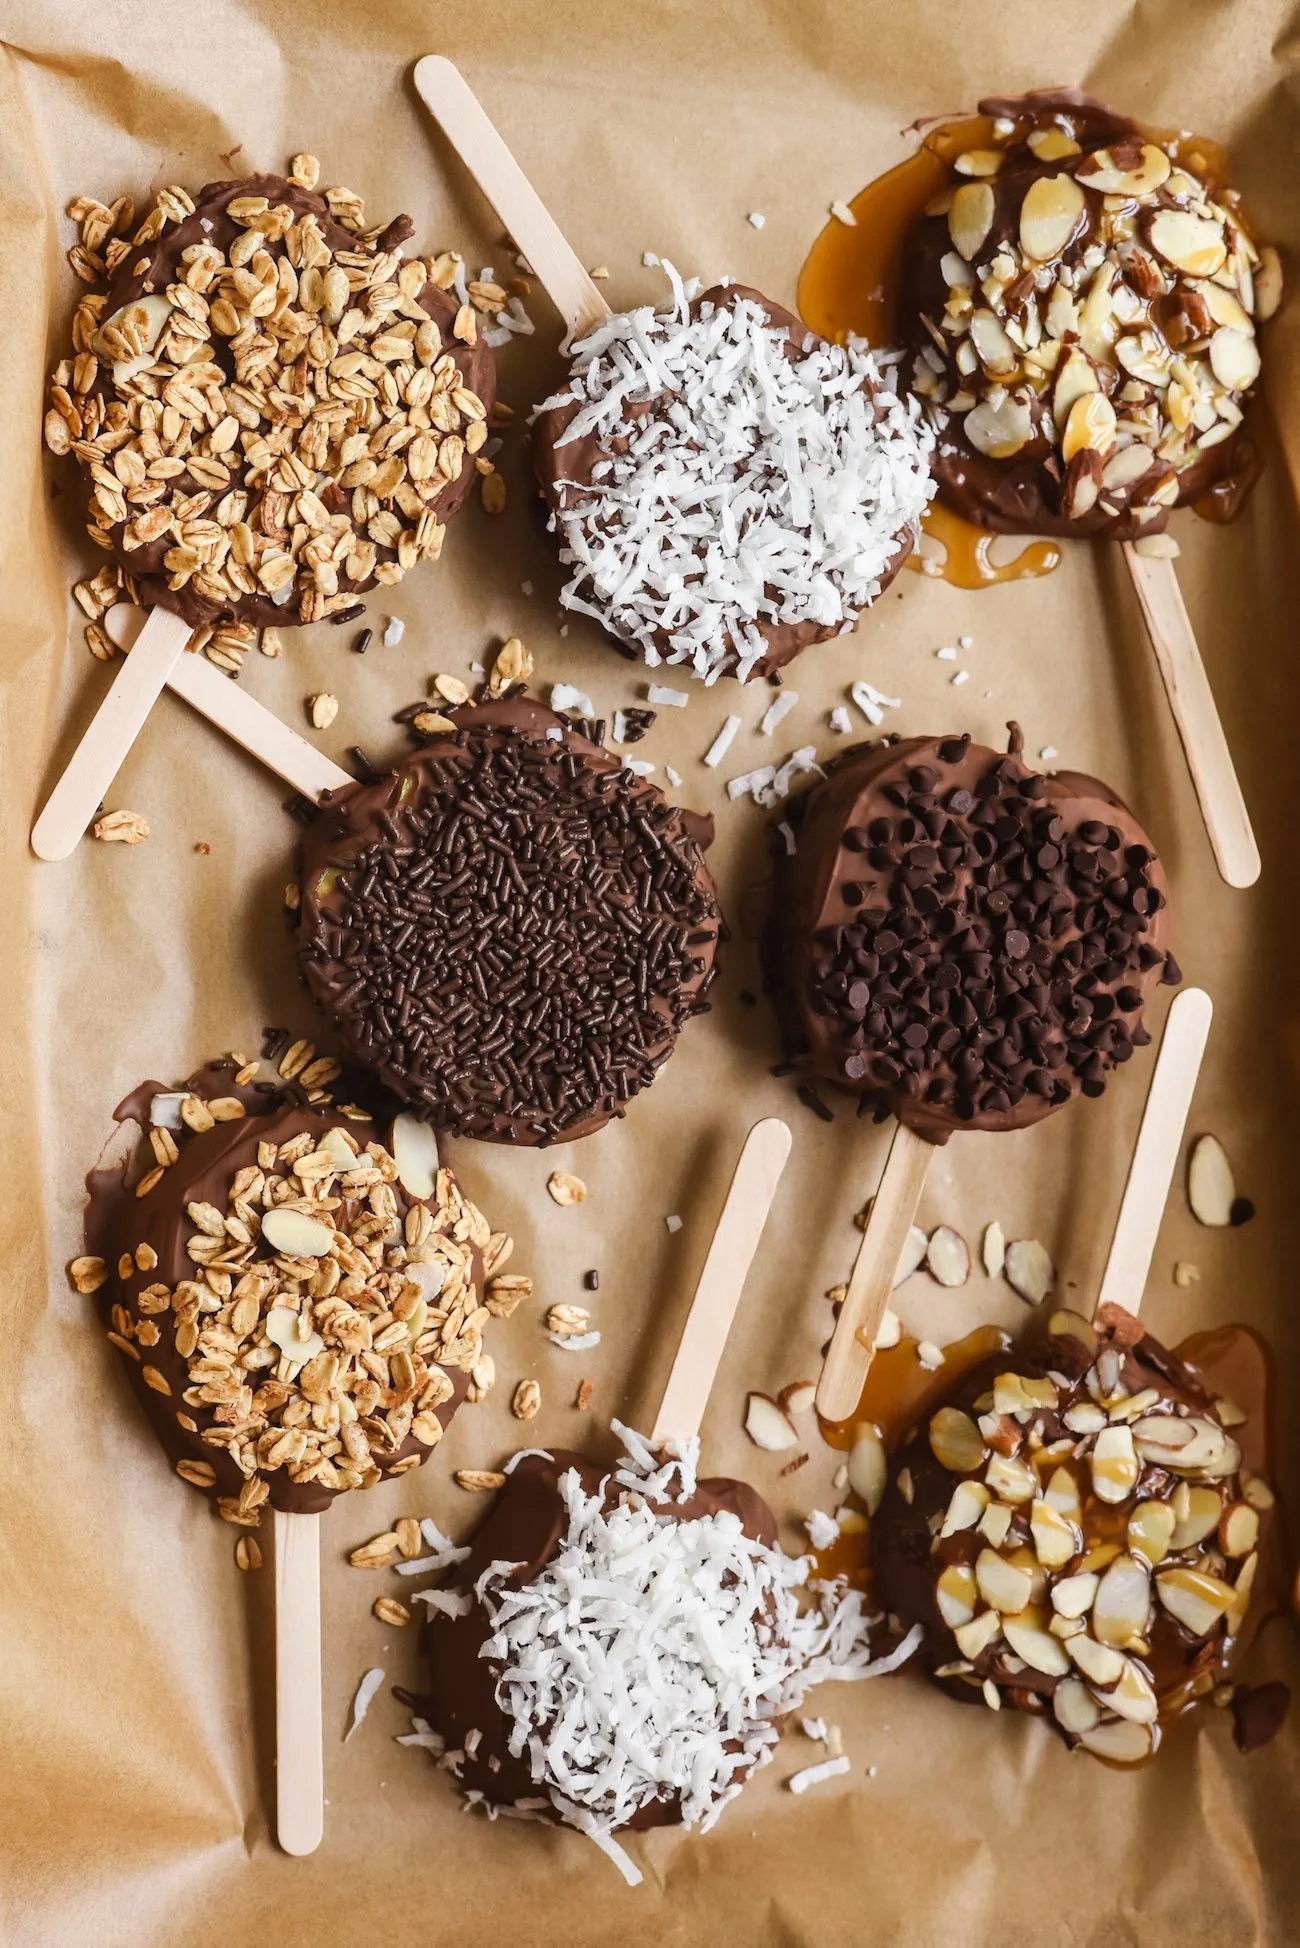 Chocolate Dipped Apples On a Stick | Fall recipes, fall desserts, party ideas, entertaining tips and more from @cydconverse